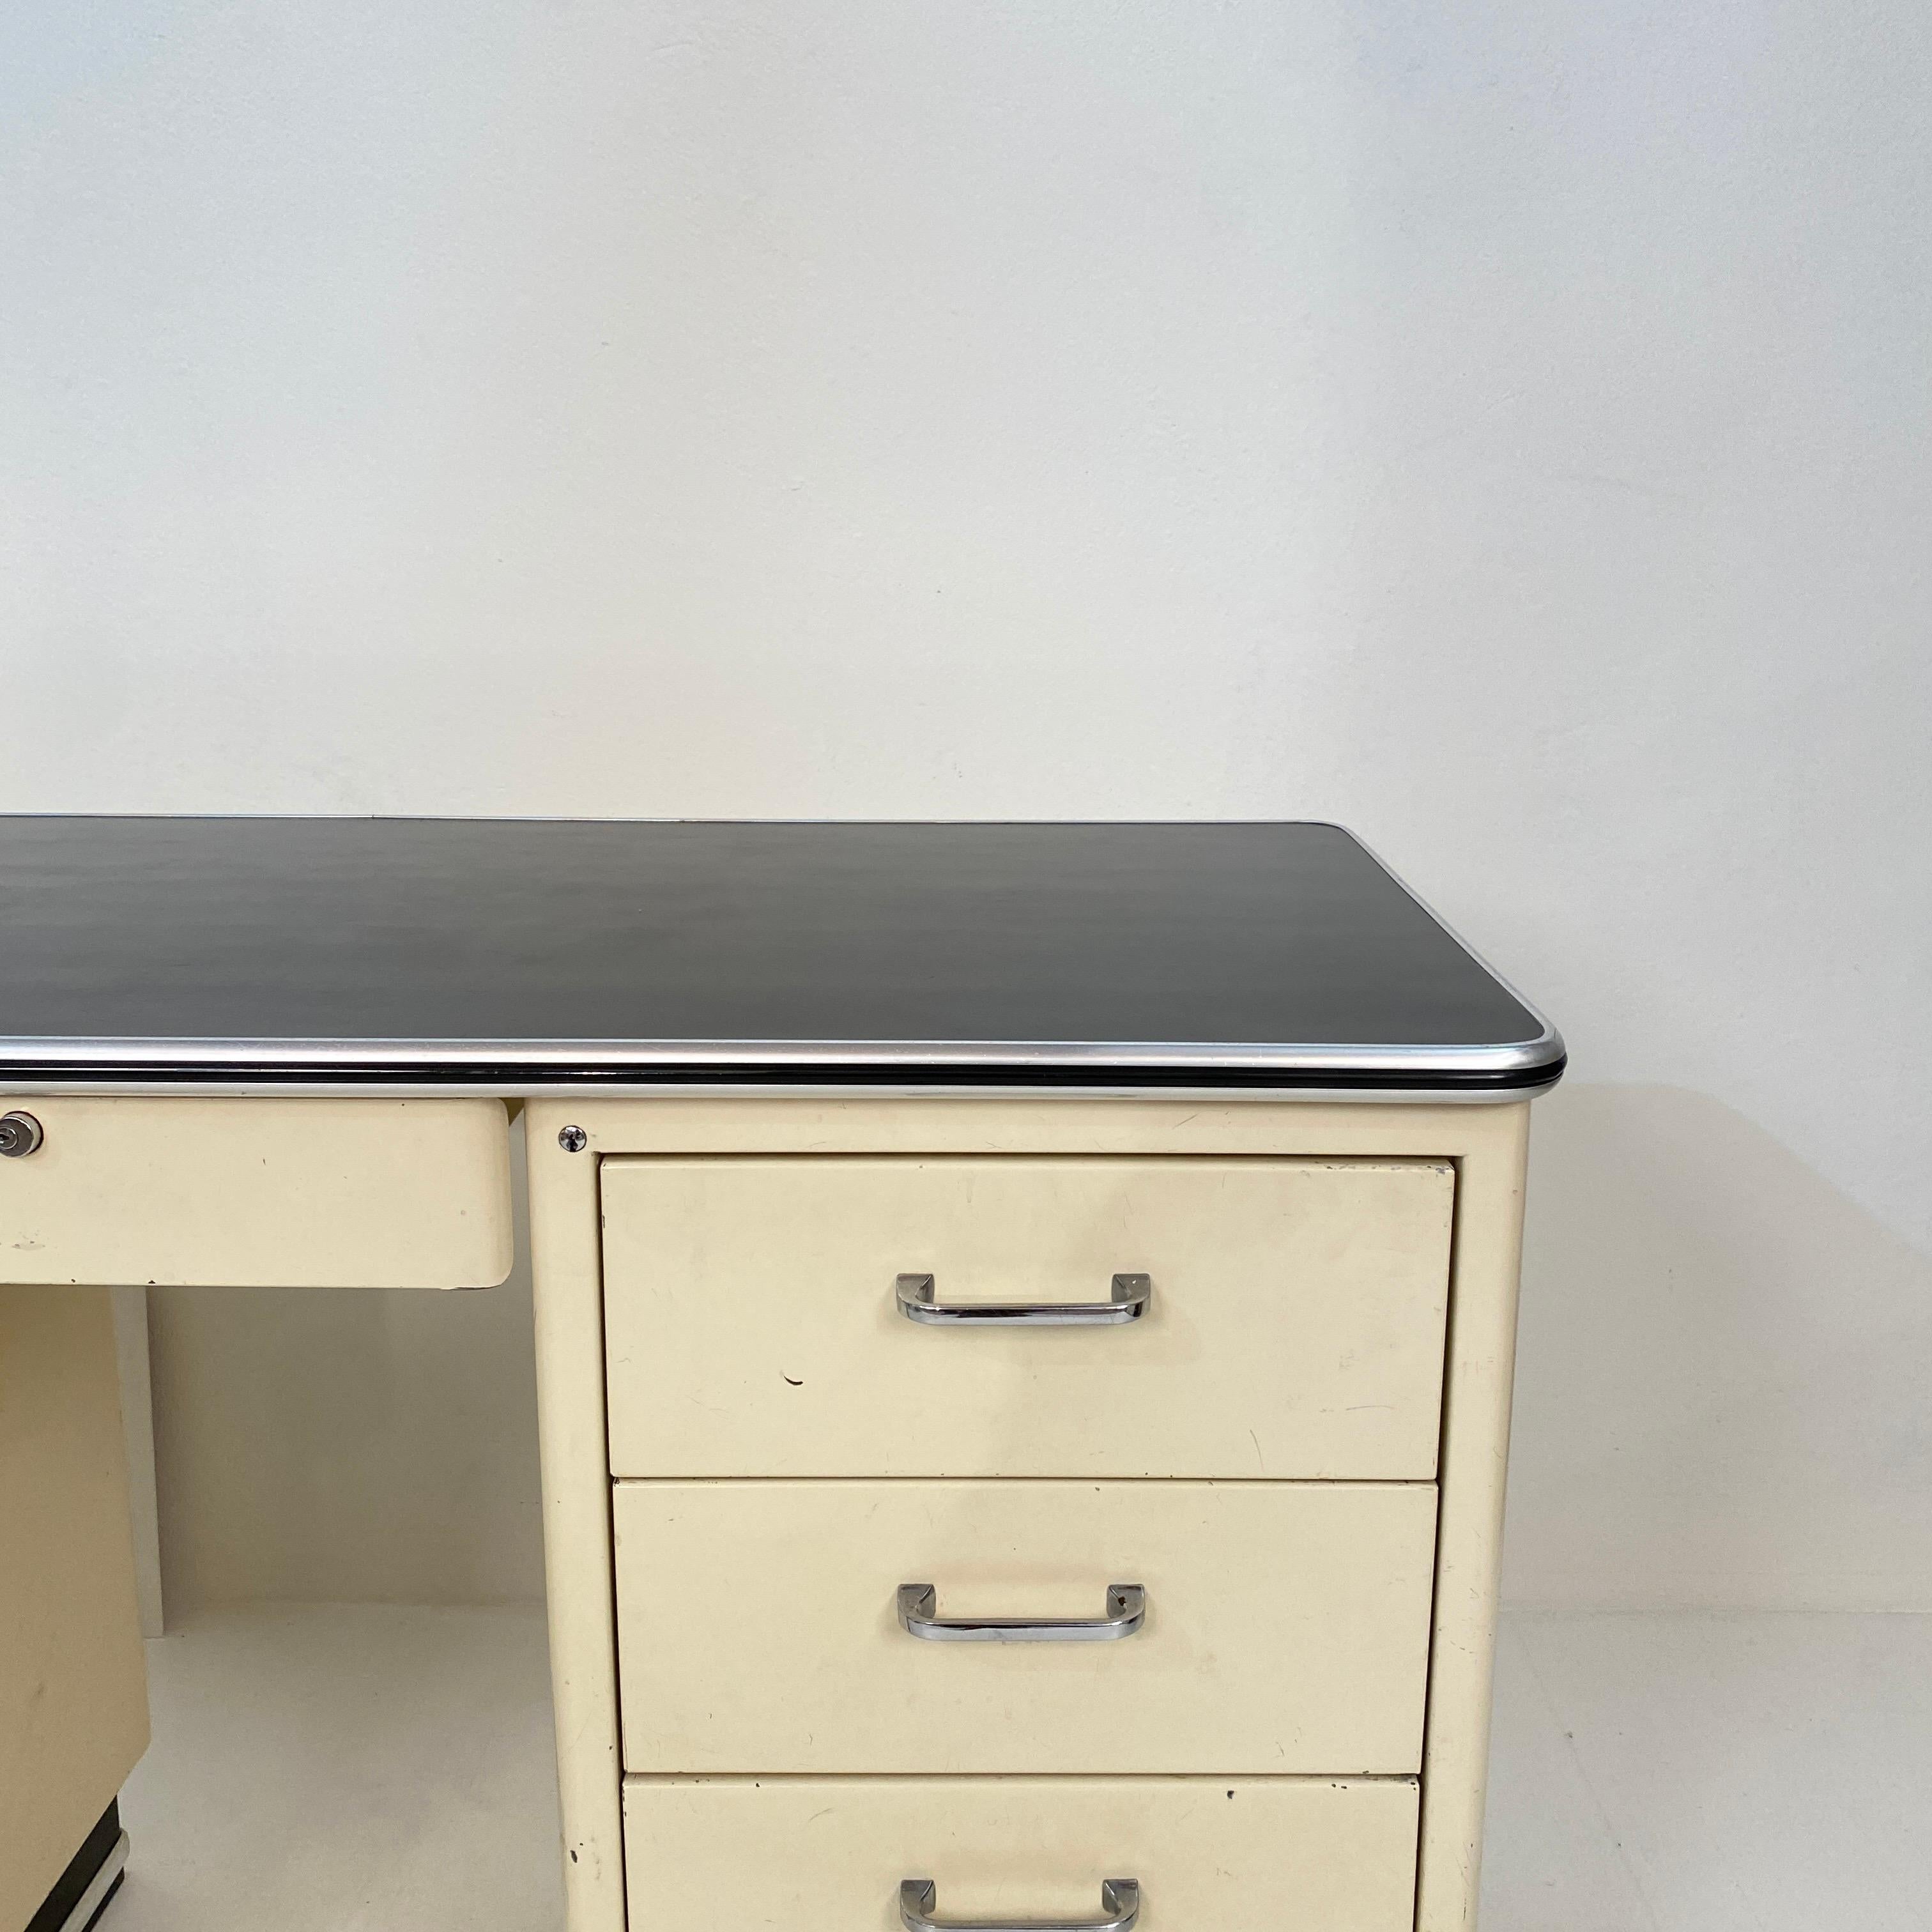 1930s German Bauhaus Desk Out of White Lacquered Metal and a Black Linoleum Top 5